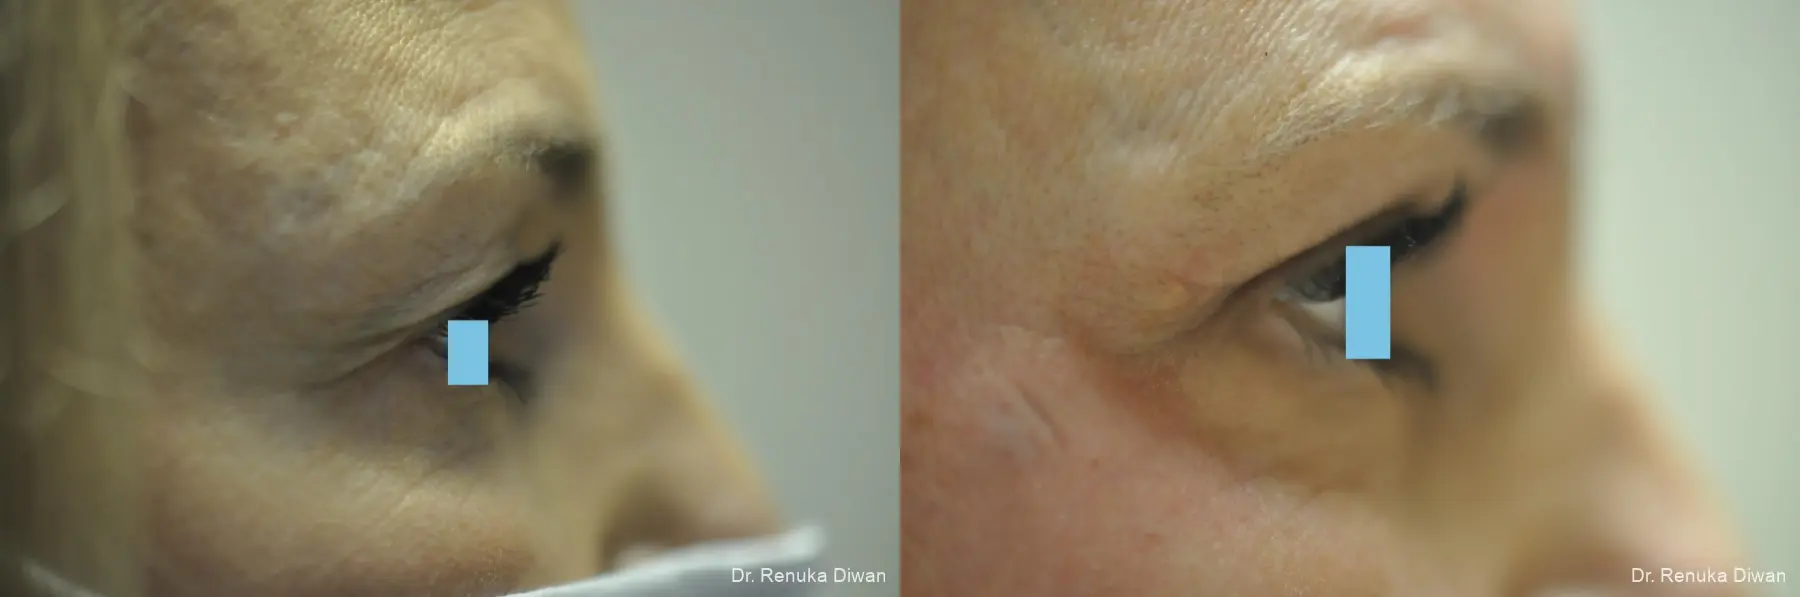 Blepharoplasty: Patient 7 - Before and After 5